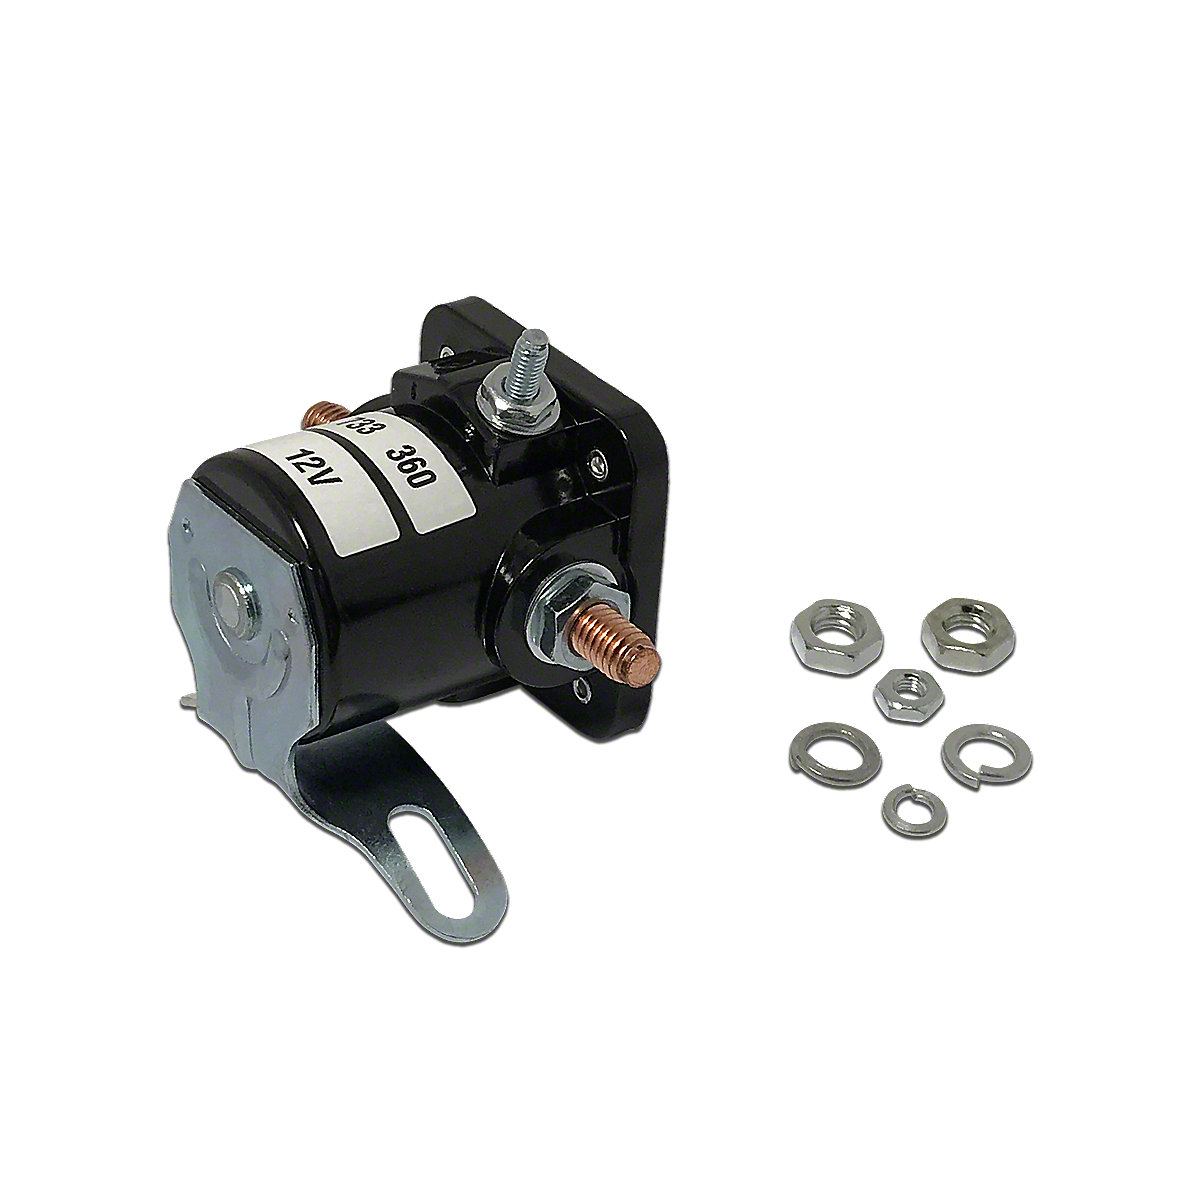 Original style 3-lead solenoid

Metal housing

Copper leads

12V

Mounts directly on the Oliver Super 55 and others:

Super 44, Super 55, Super 66, Super 77, Super 88, 66, 77, 88, 440, 550, 660, 770, 880, 1600, 1800 (12 VOLT ONLY) ], 950 (Gas, 12 VOLT ONLY) 